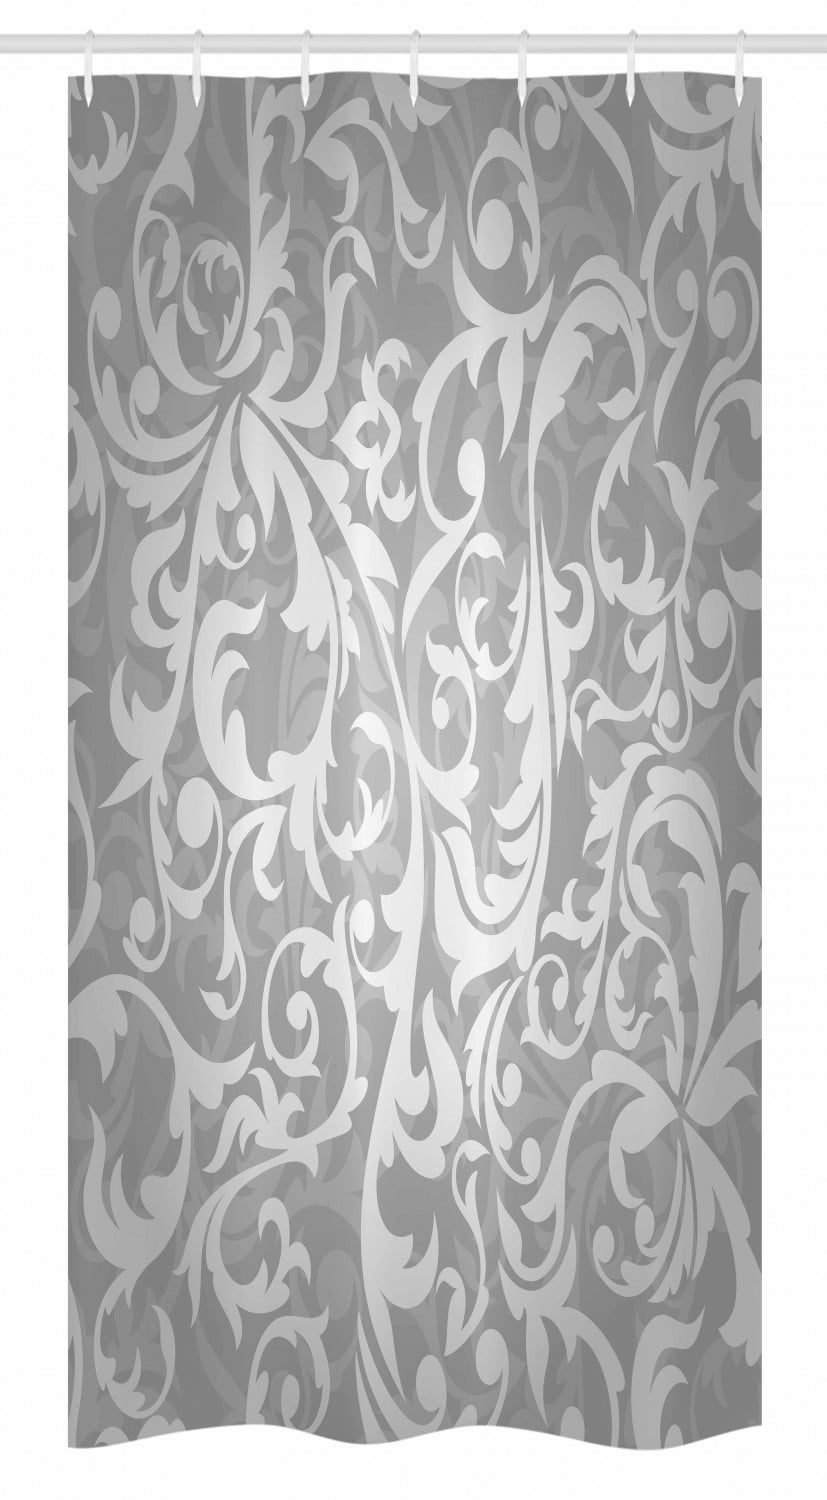 Details about   Ambesonne Rustic Shower Curtain Wood Panels Background Digital Tones Effect Cou 